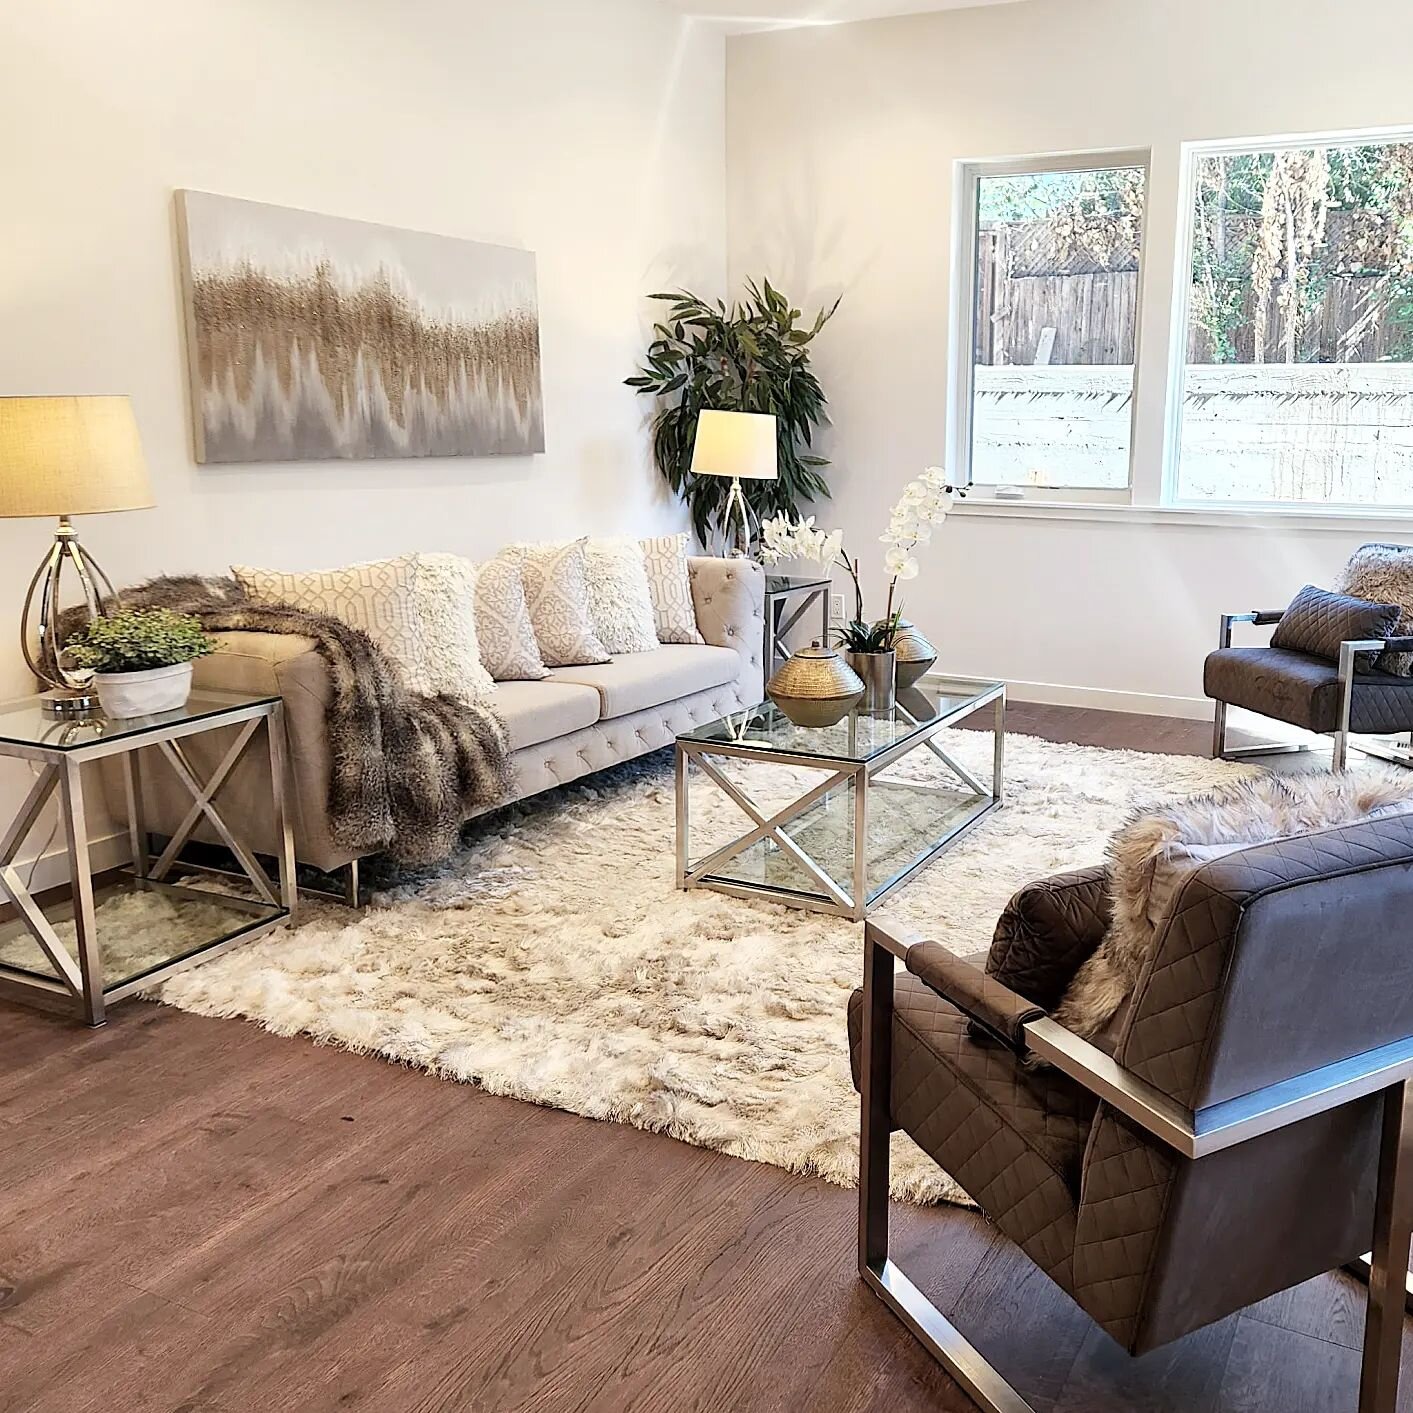 The Look Staging- Our 3rd contemporary luxe staging for this brand new construction in Menlo Park! 

#thelookstaging #365staging #staging #staginghomes #stager #newconstruction #LUXURYHOMESTAGING #listingagent #listing #milliondollarlisting #realtor 